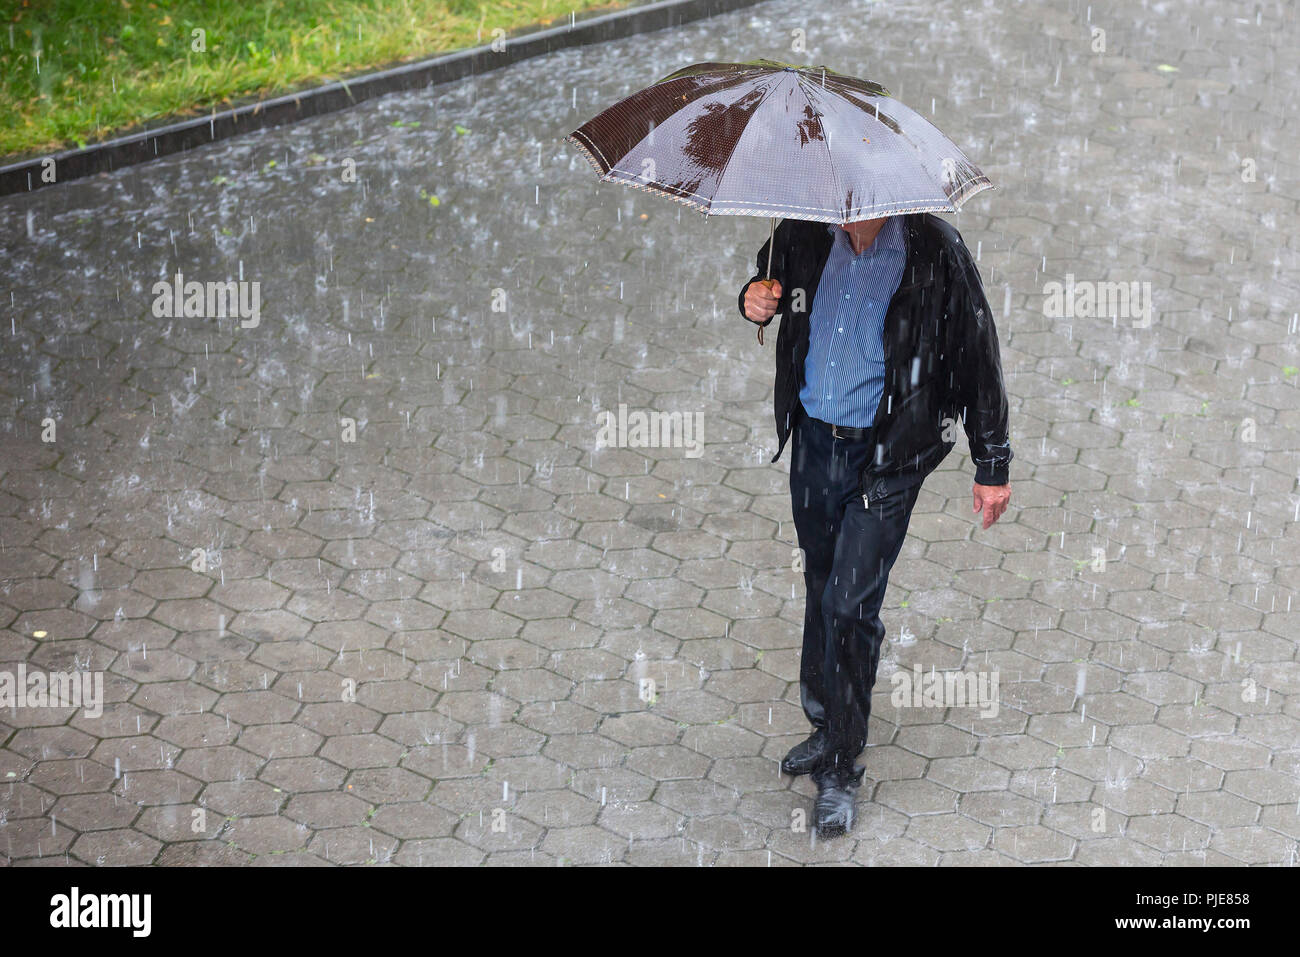 A man runs in the rainy weather with hir brown umbrella. Raining like cats and dogs. Bad weather. Climate change. Stock Photo